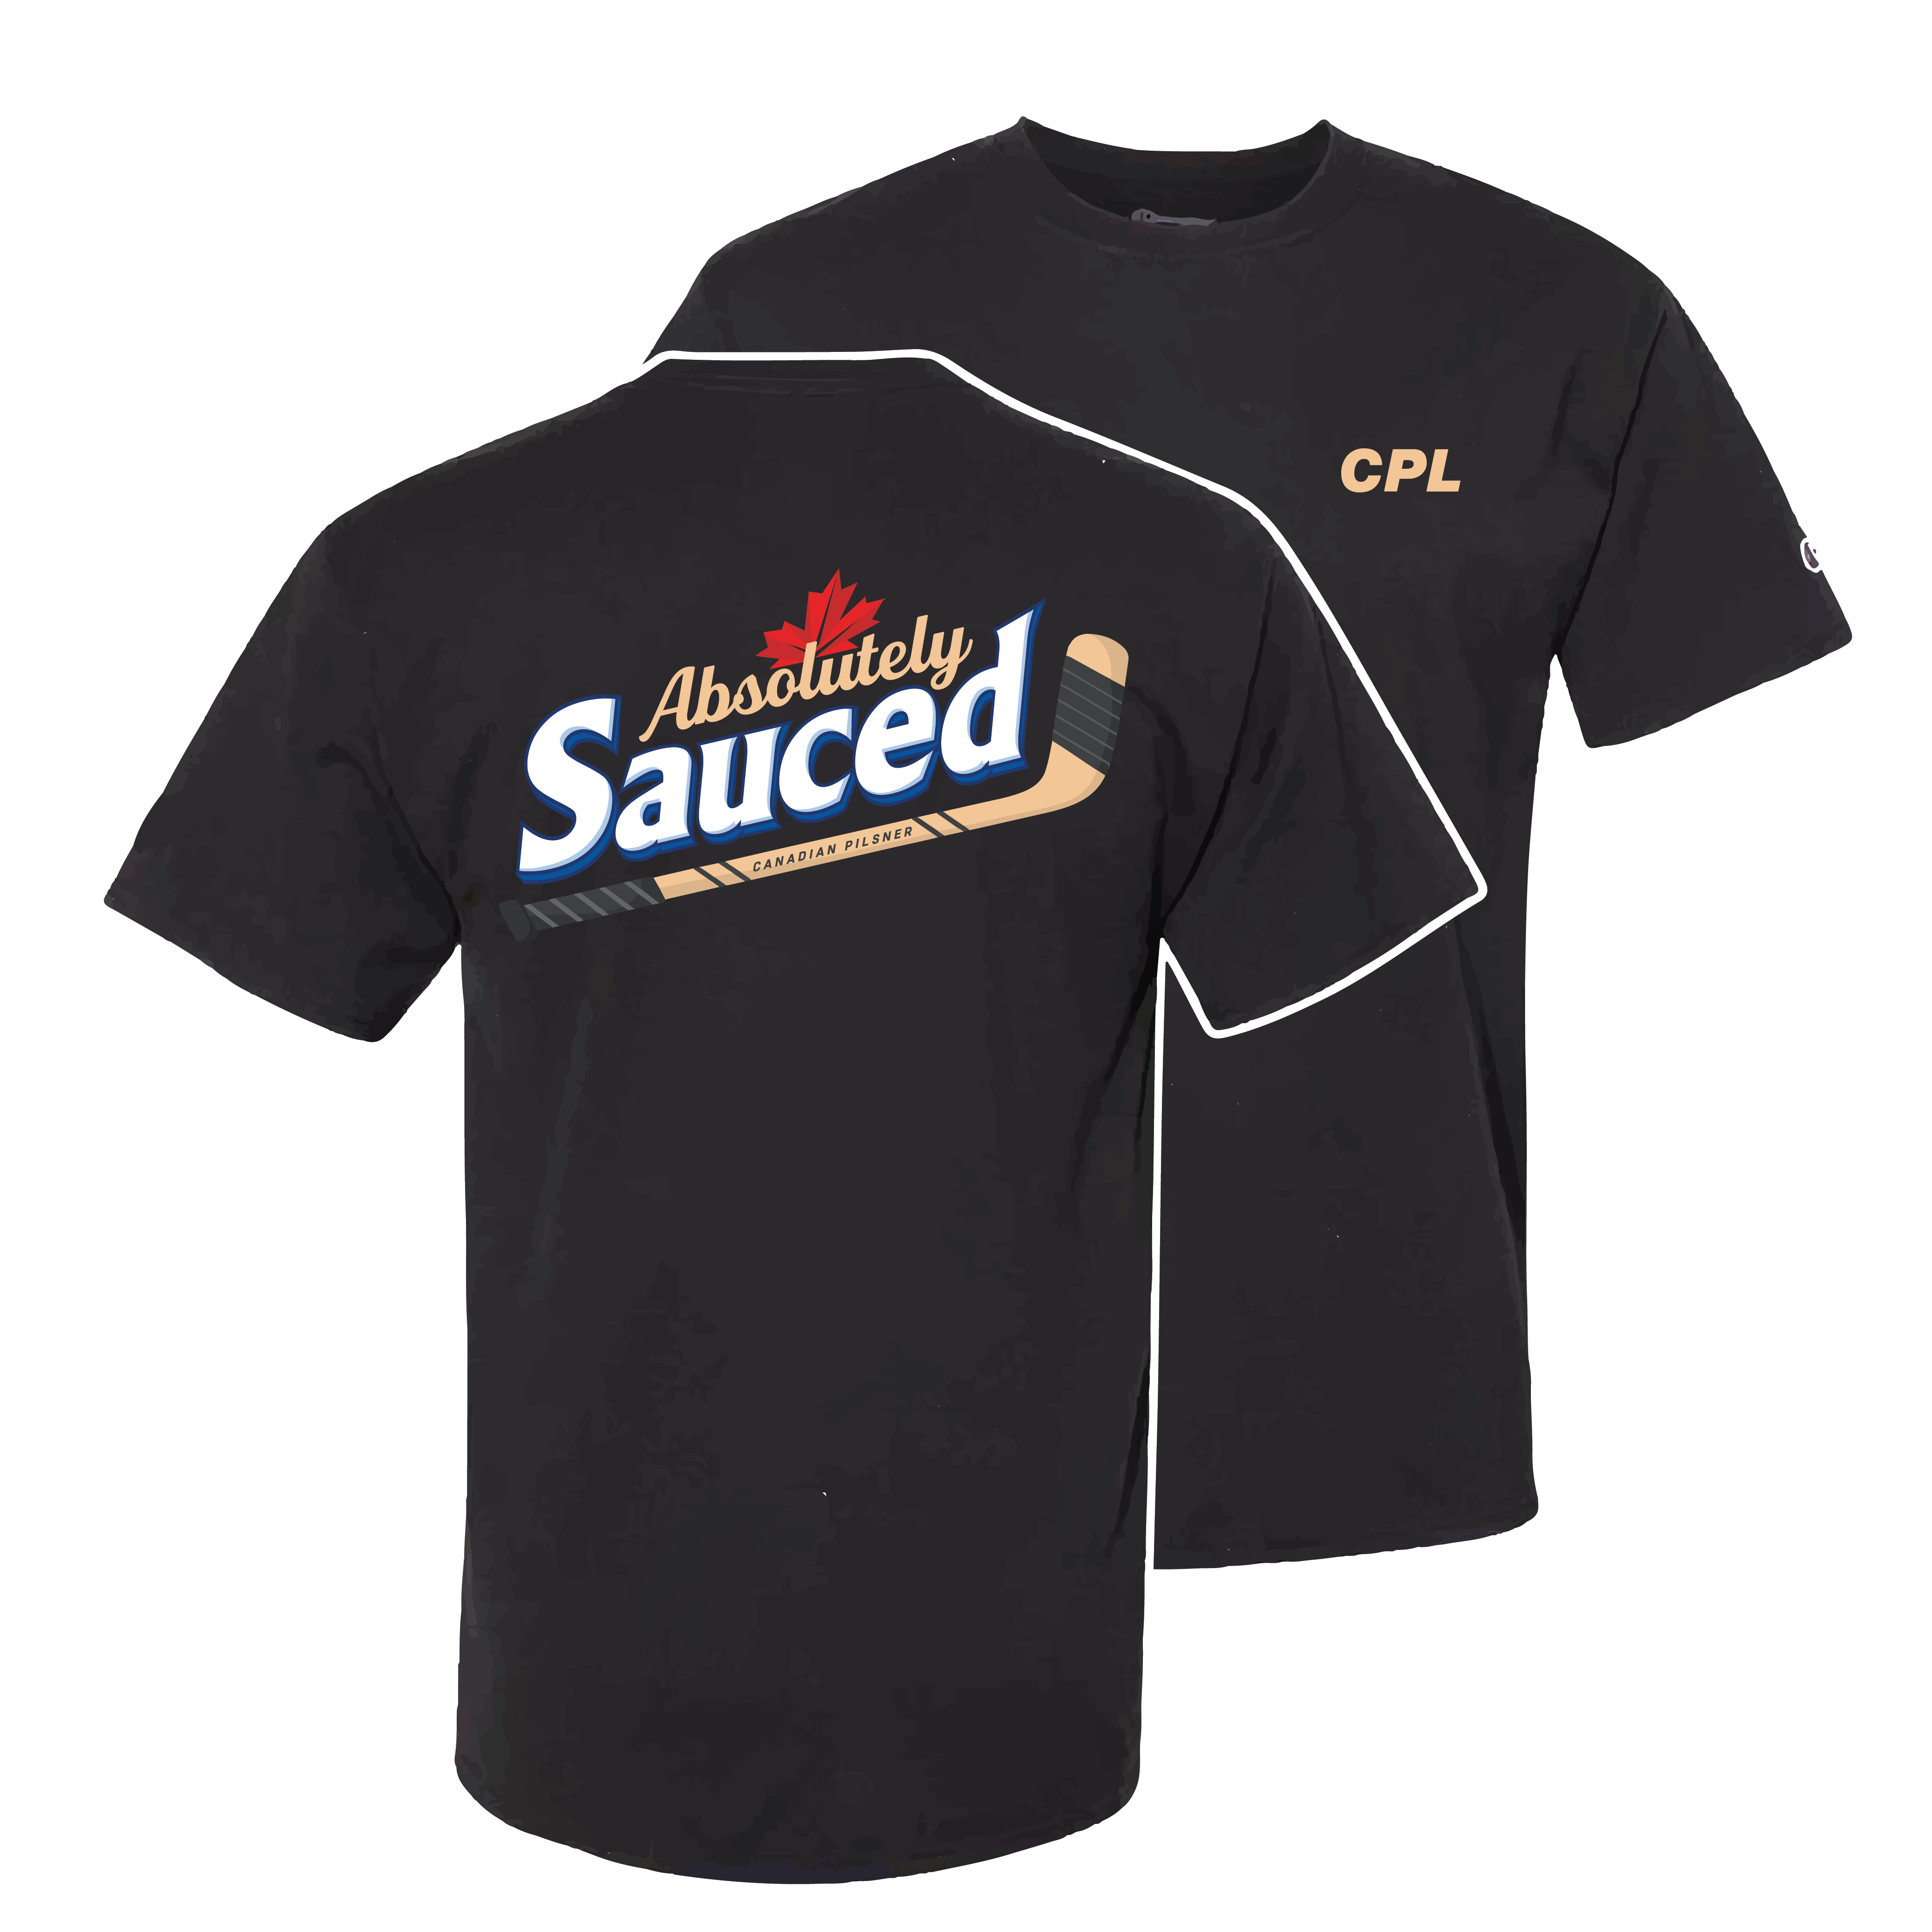 Absolutely Sauced T-Shirt